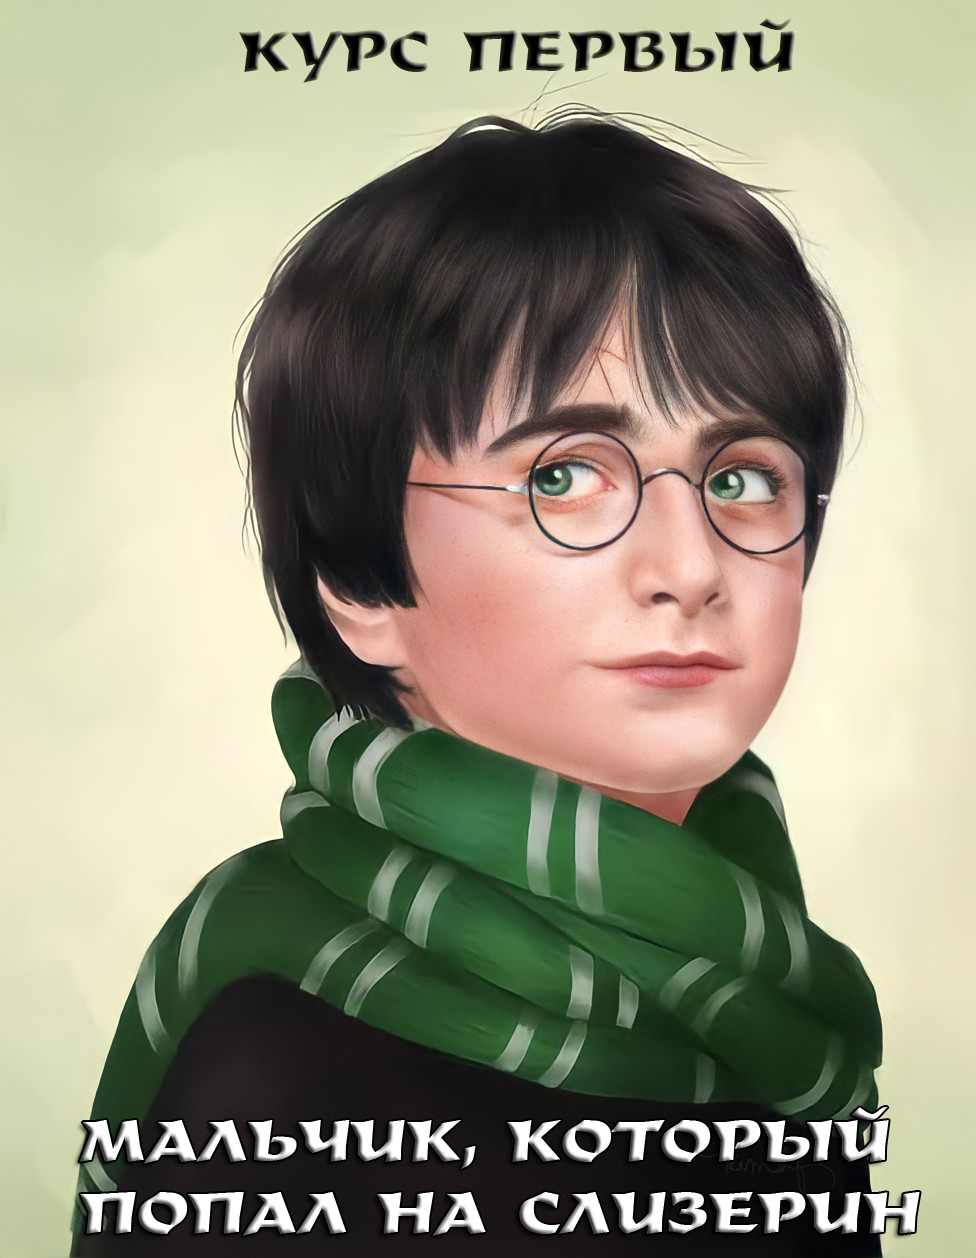 The Boy Who Was Slytherin. Survive at any cost - pikabu.monster